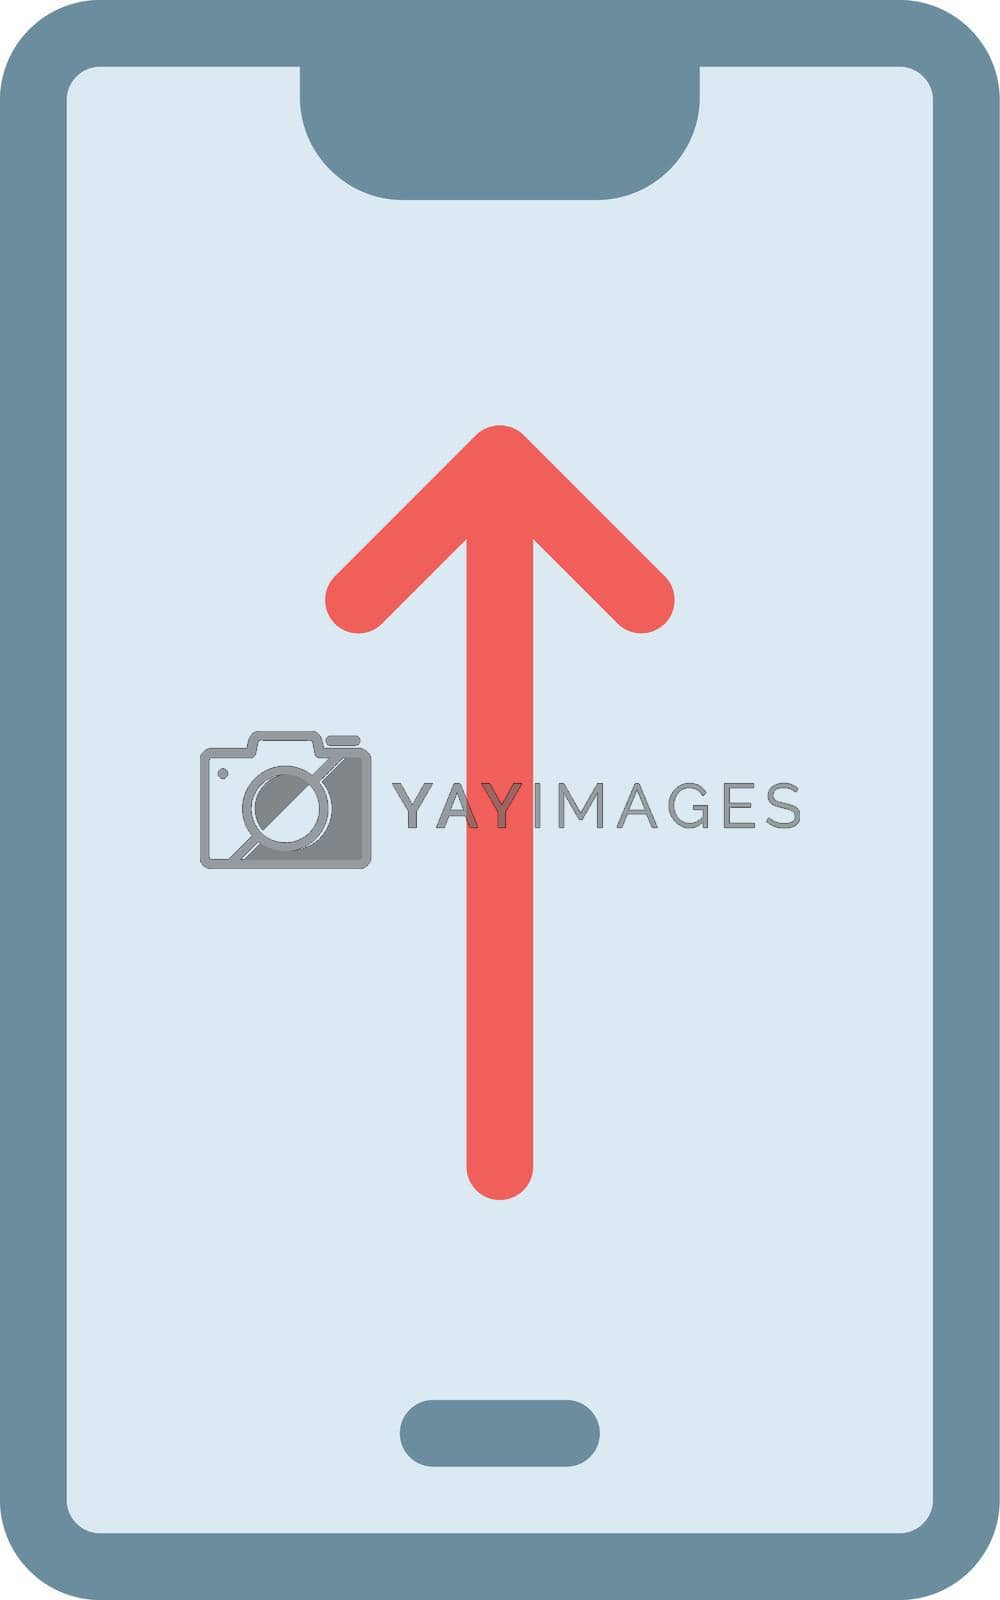 Royalty free image of arrow up  by FlaticonsDesign